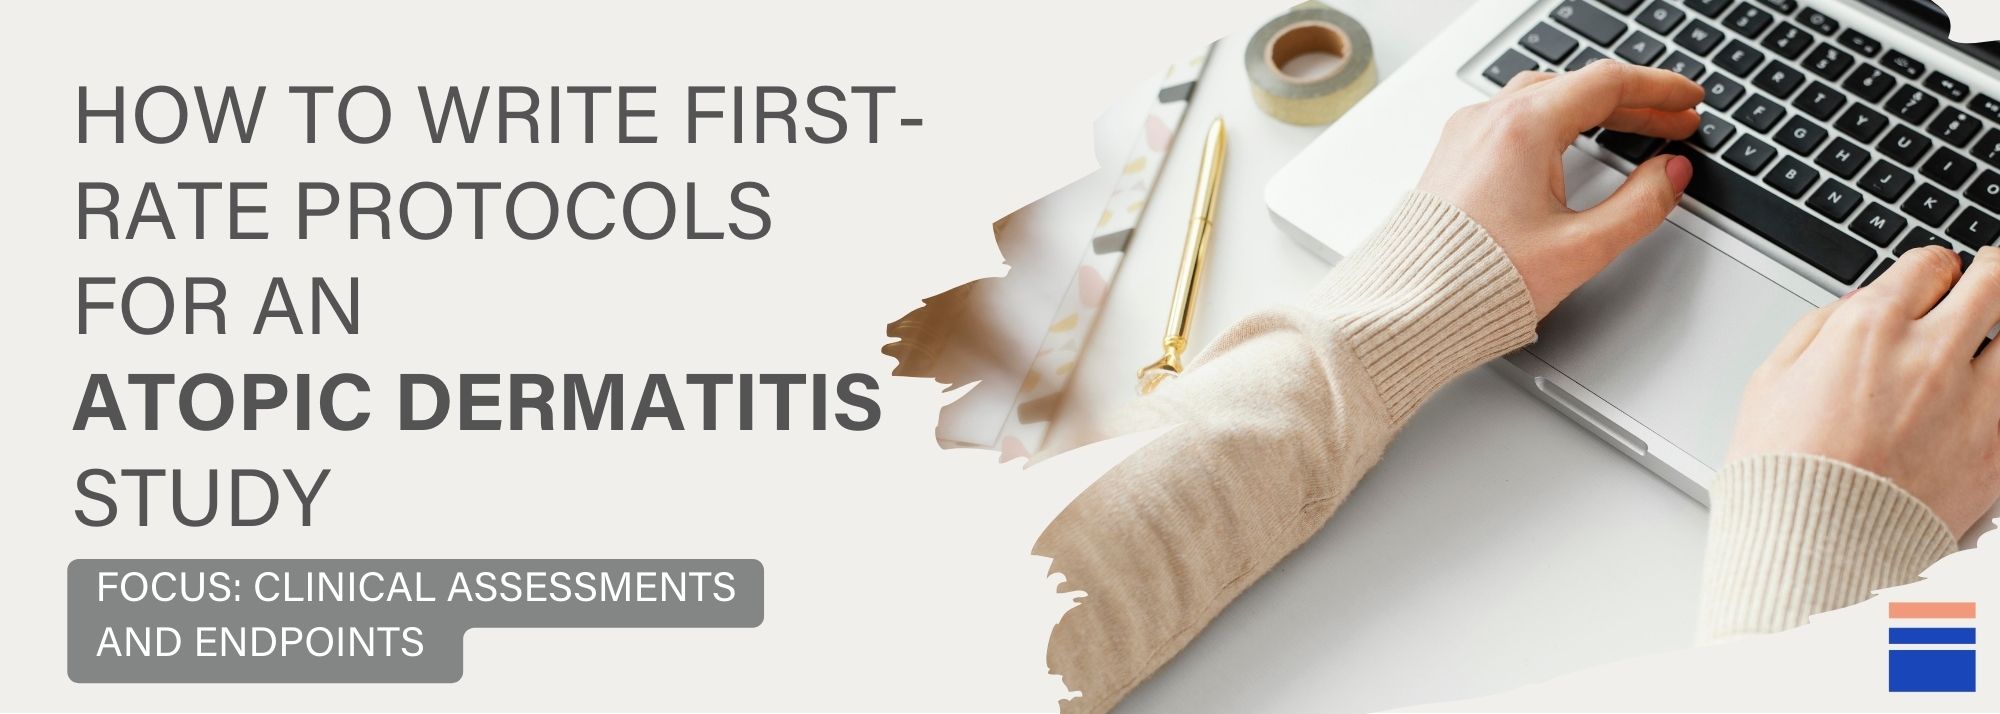 Writing protocols for atopic dermatitis clinical trials